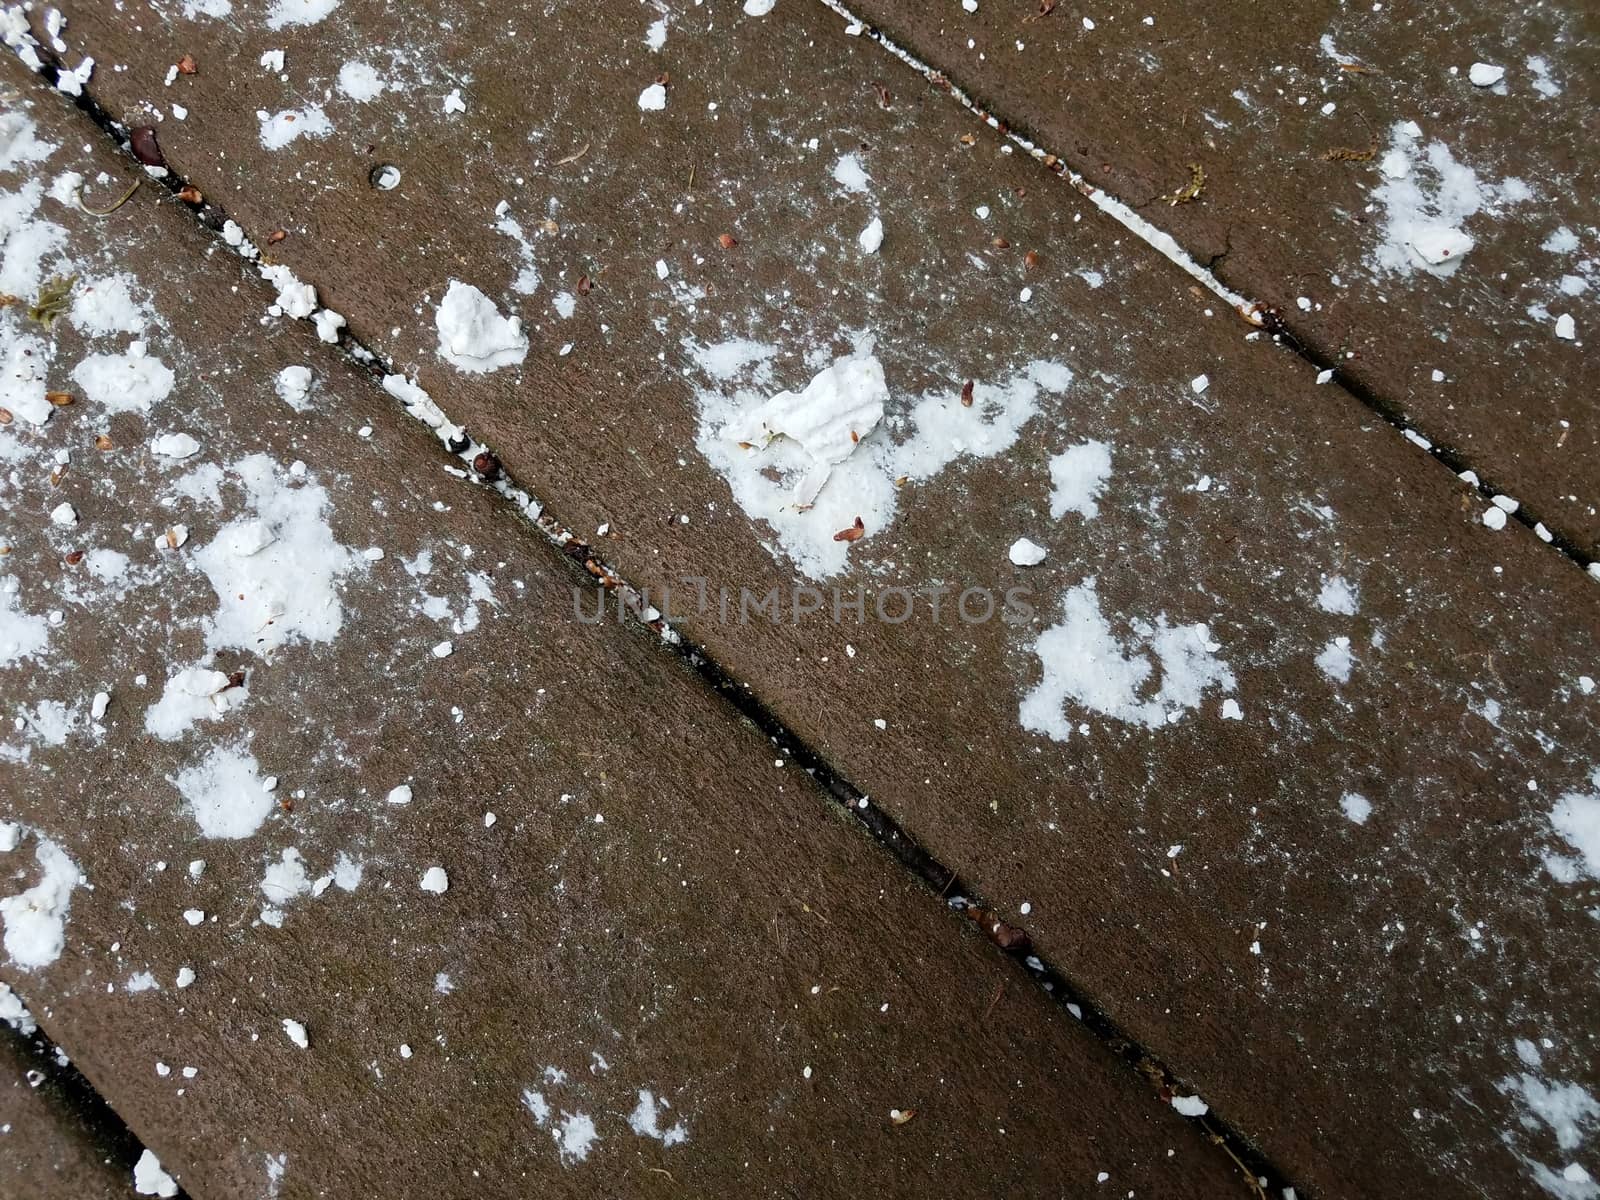 wet white chalk substance on brown wood deck or ground